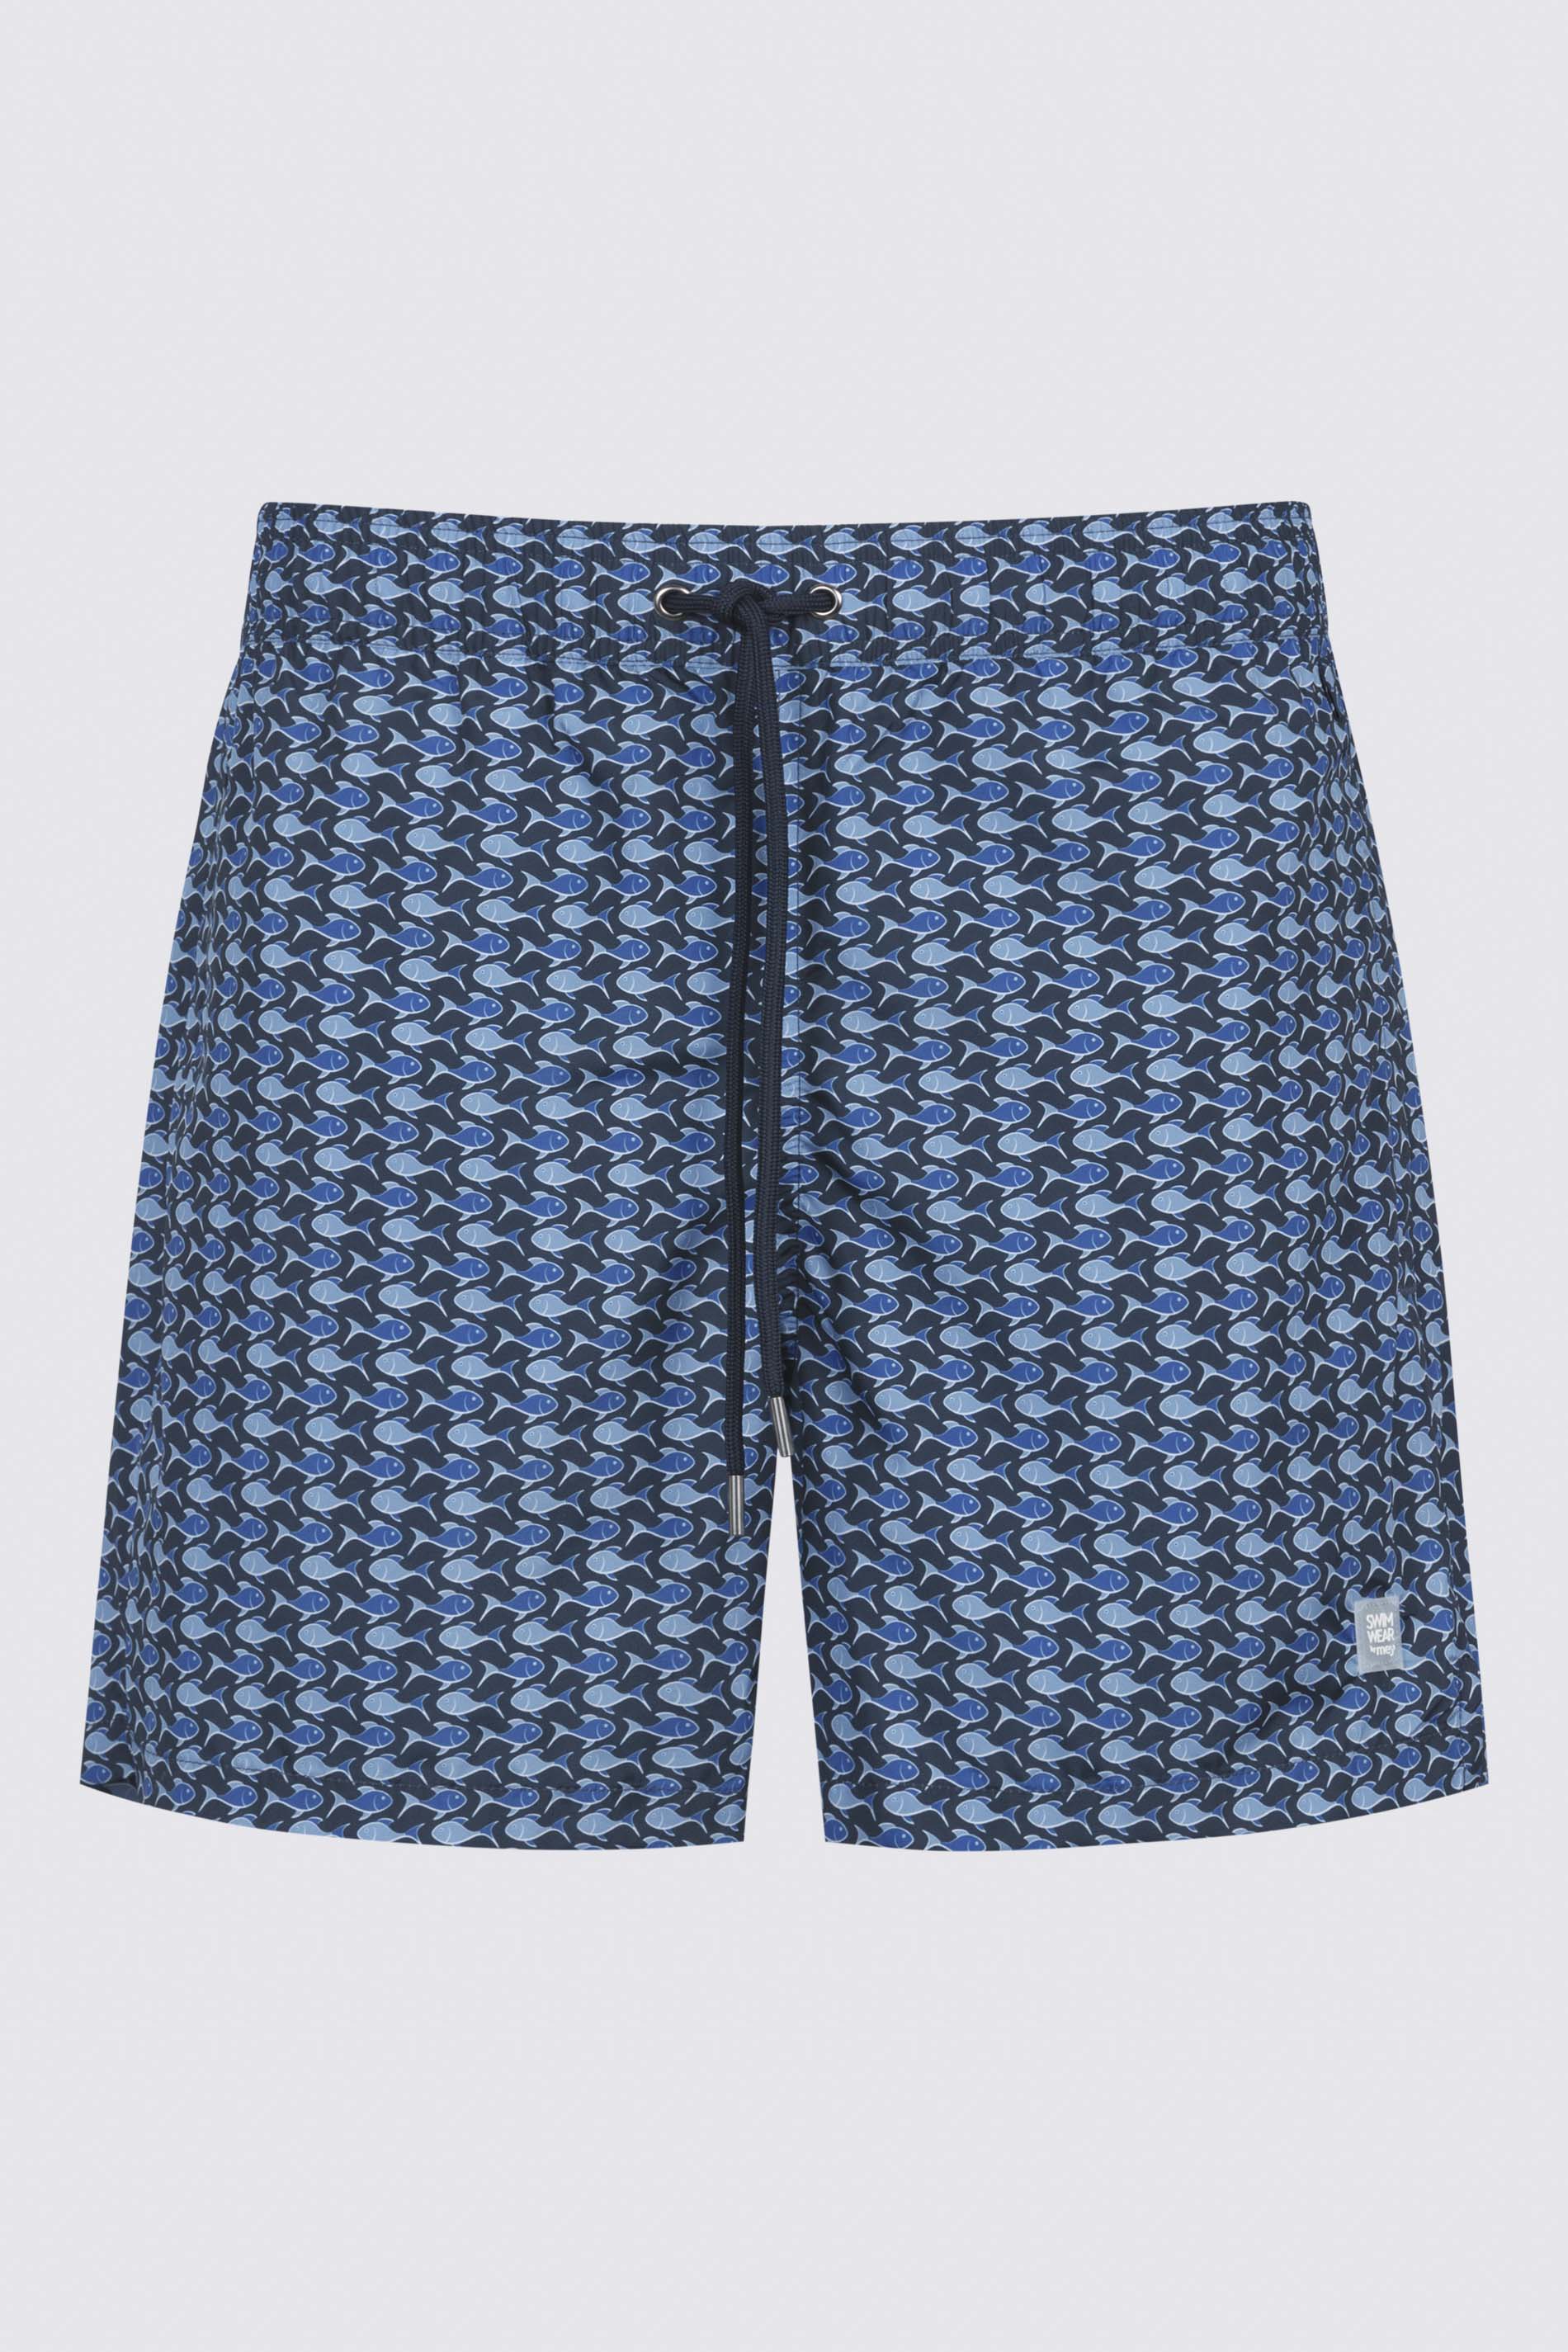 Zwemshorts Serie Mini Fish Uitknippen | mey®